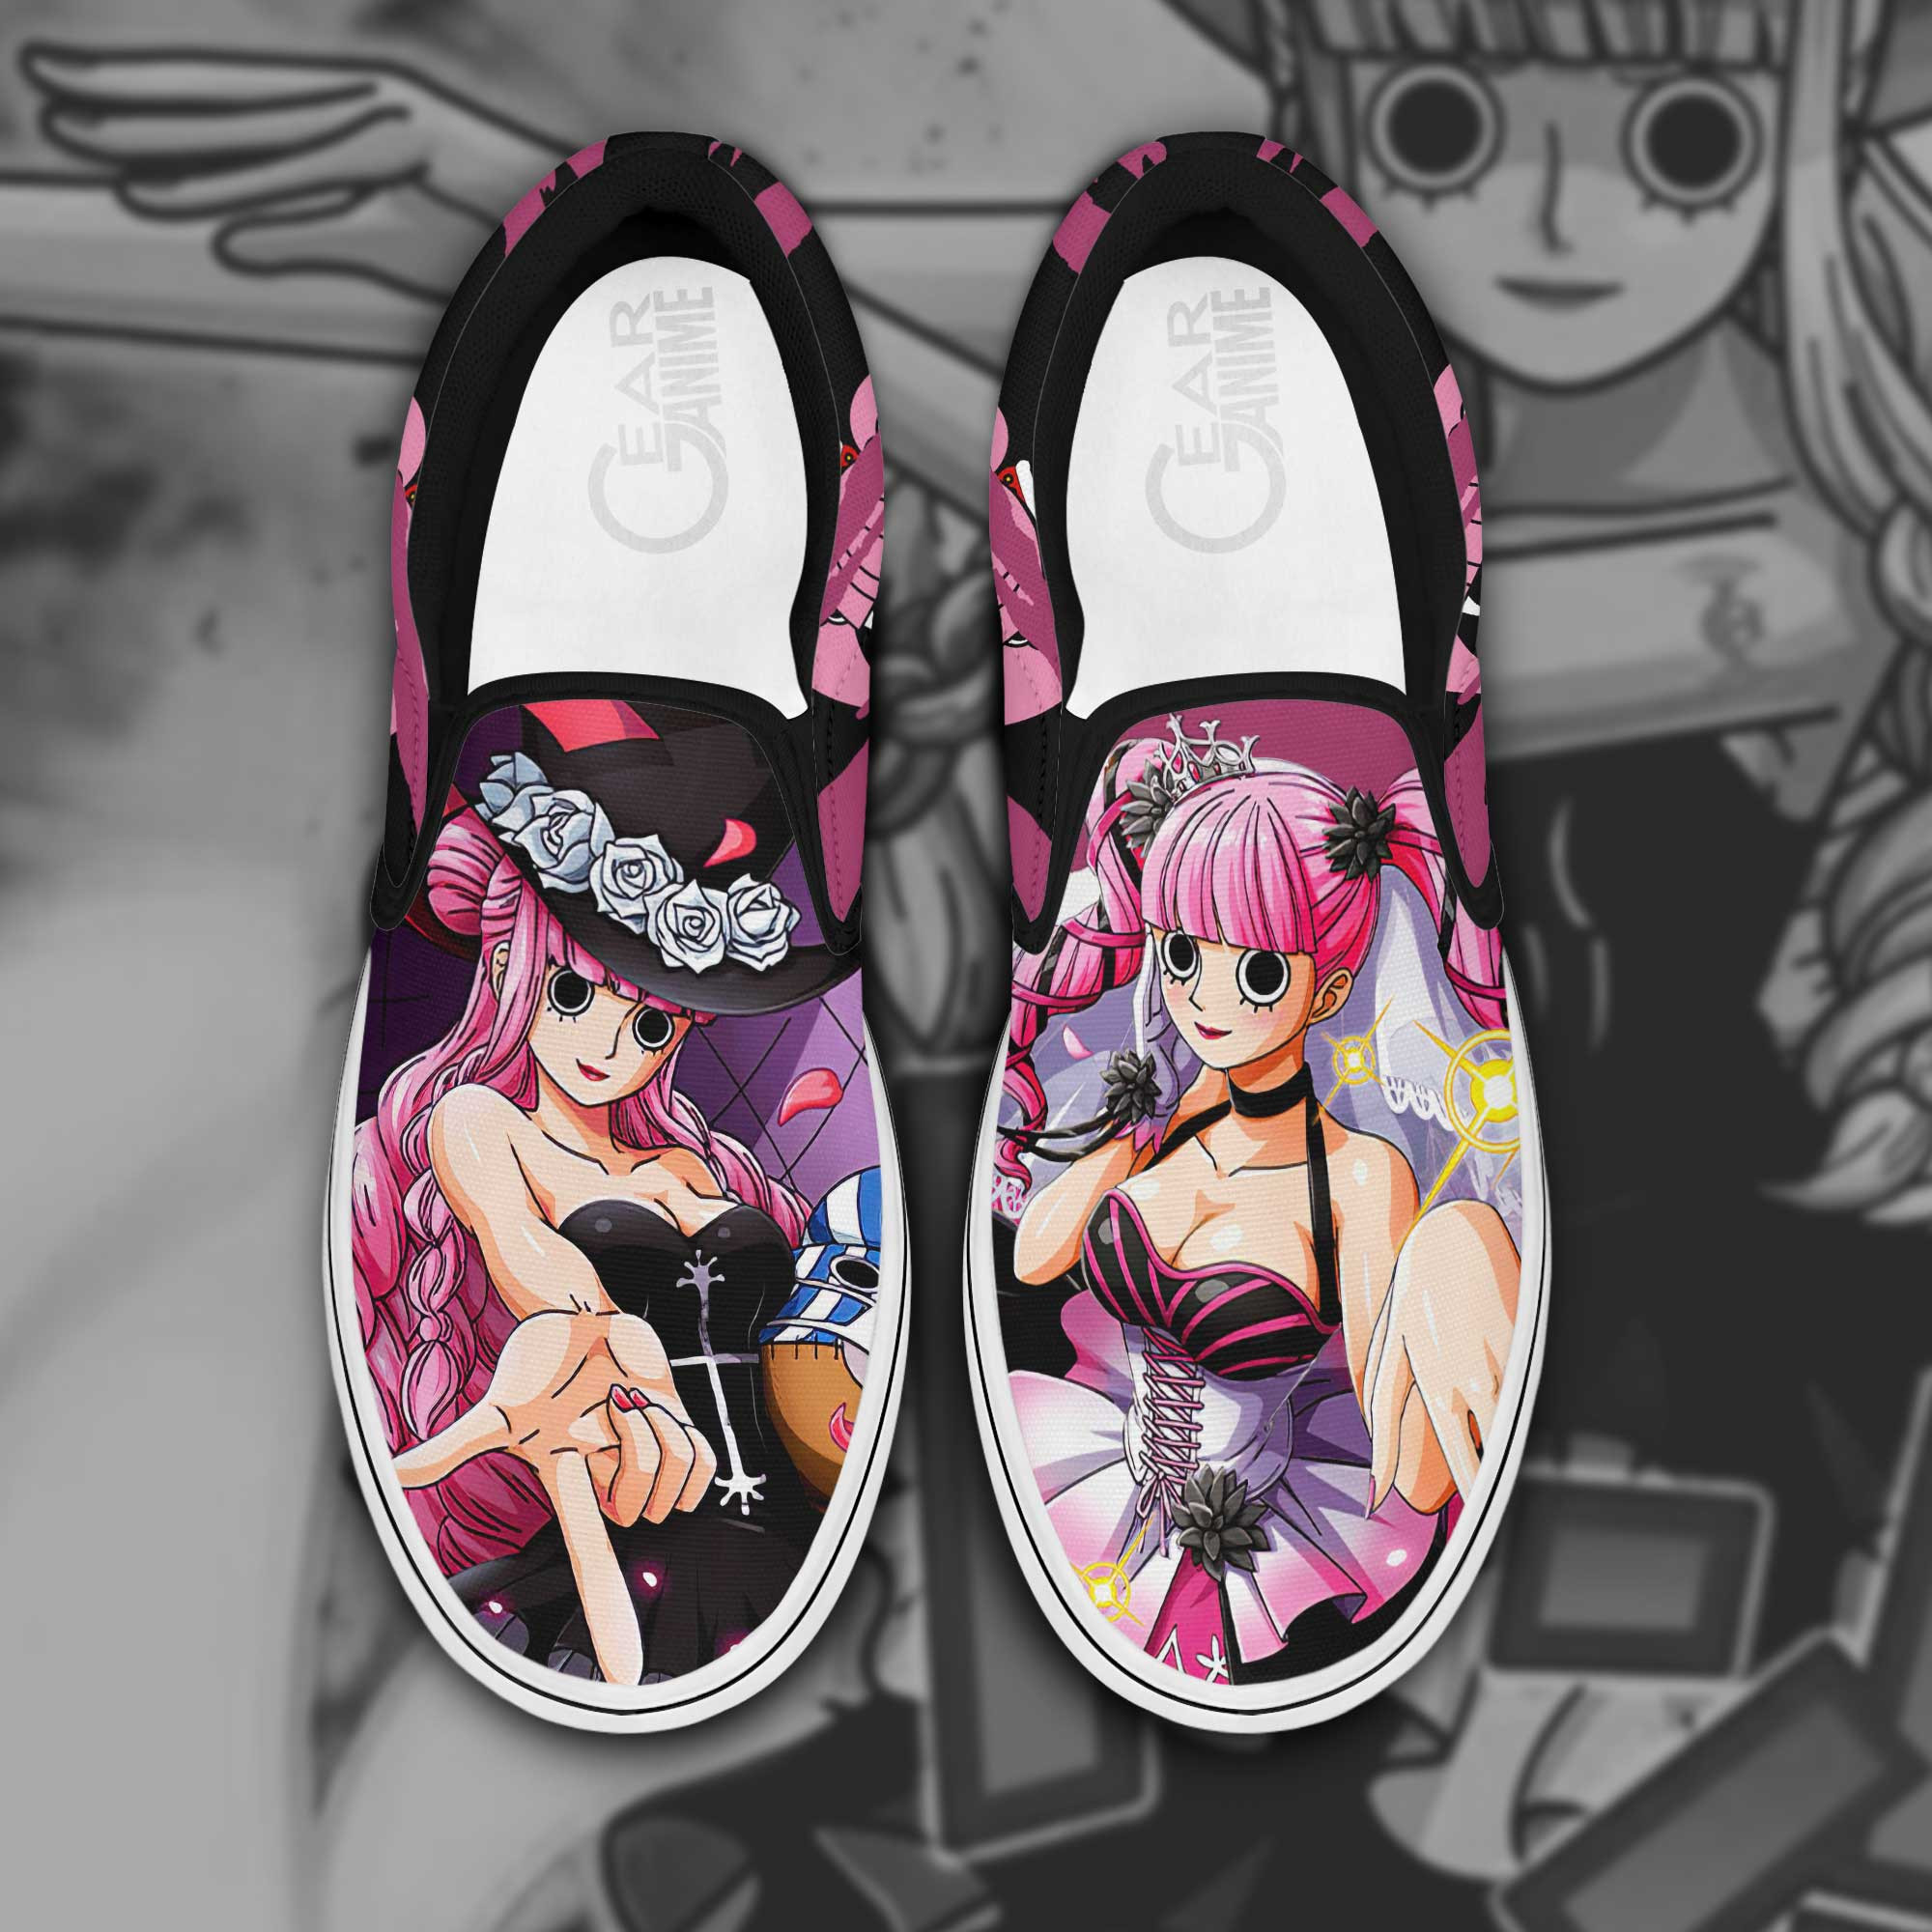 These Sneakers are a must-have for any Anime fan 136